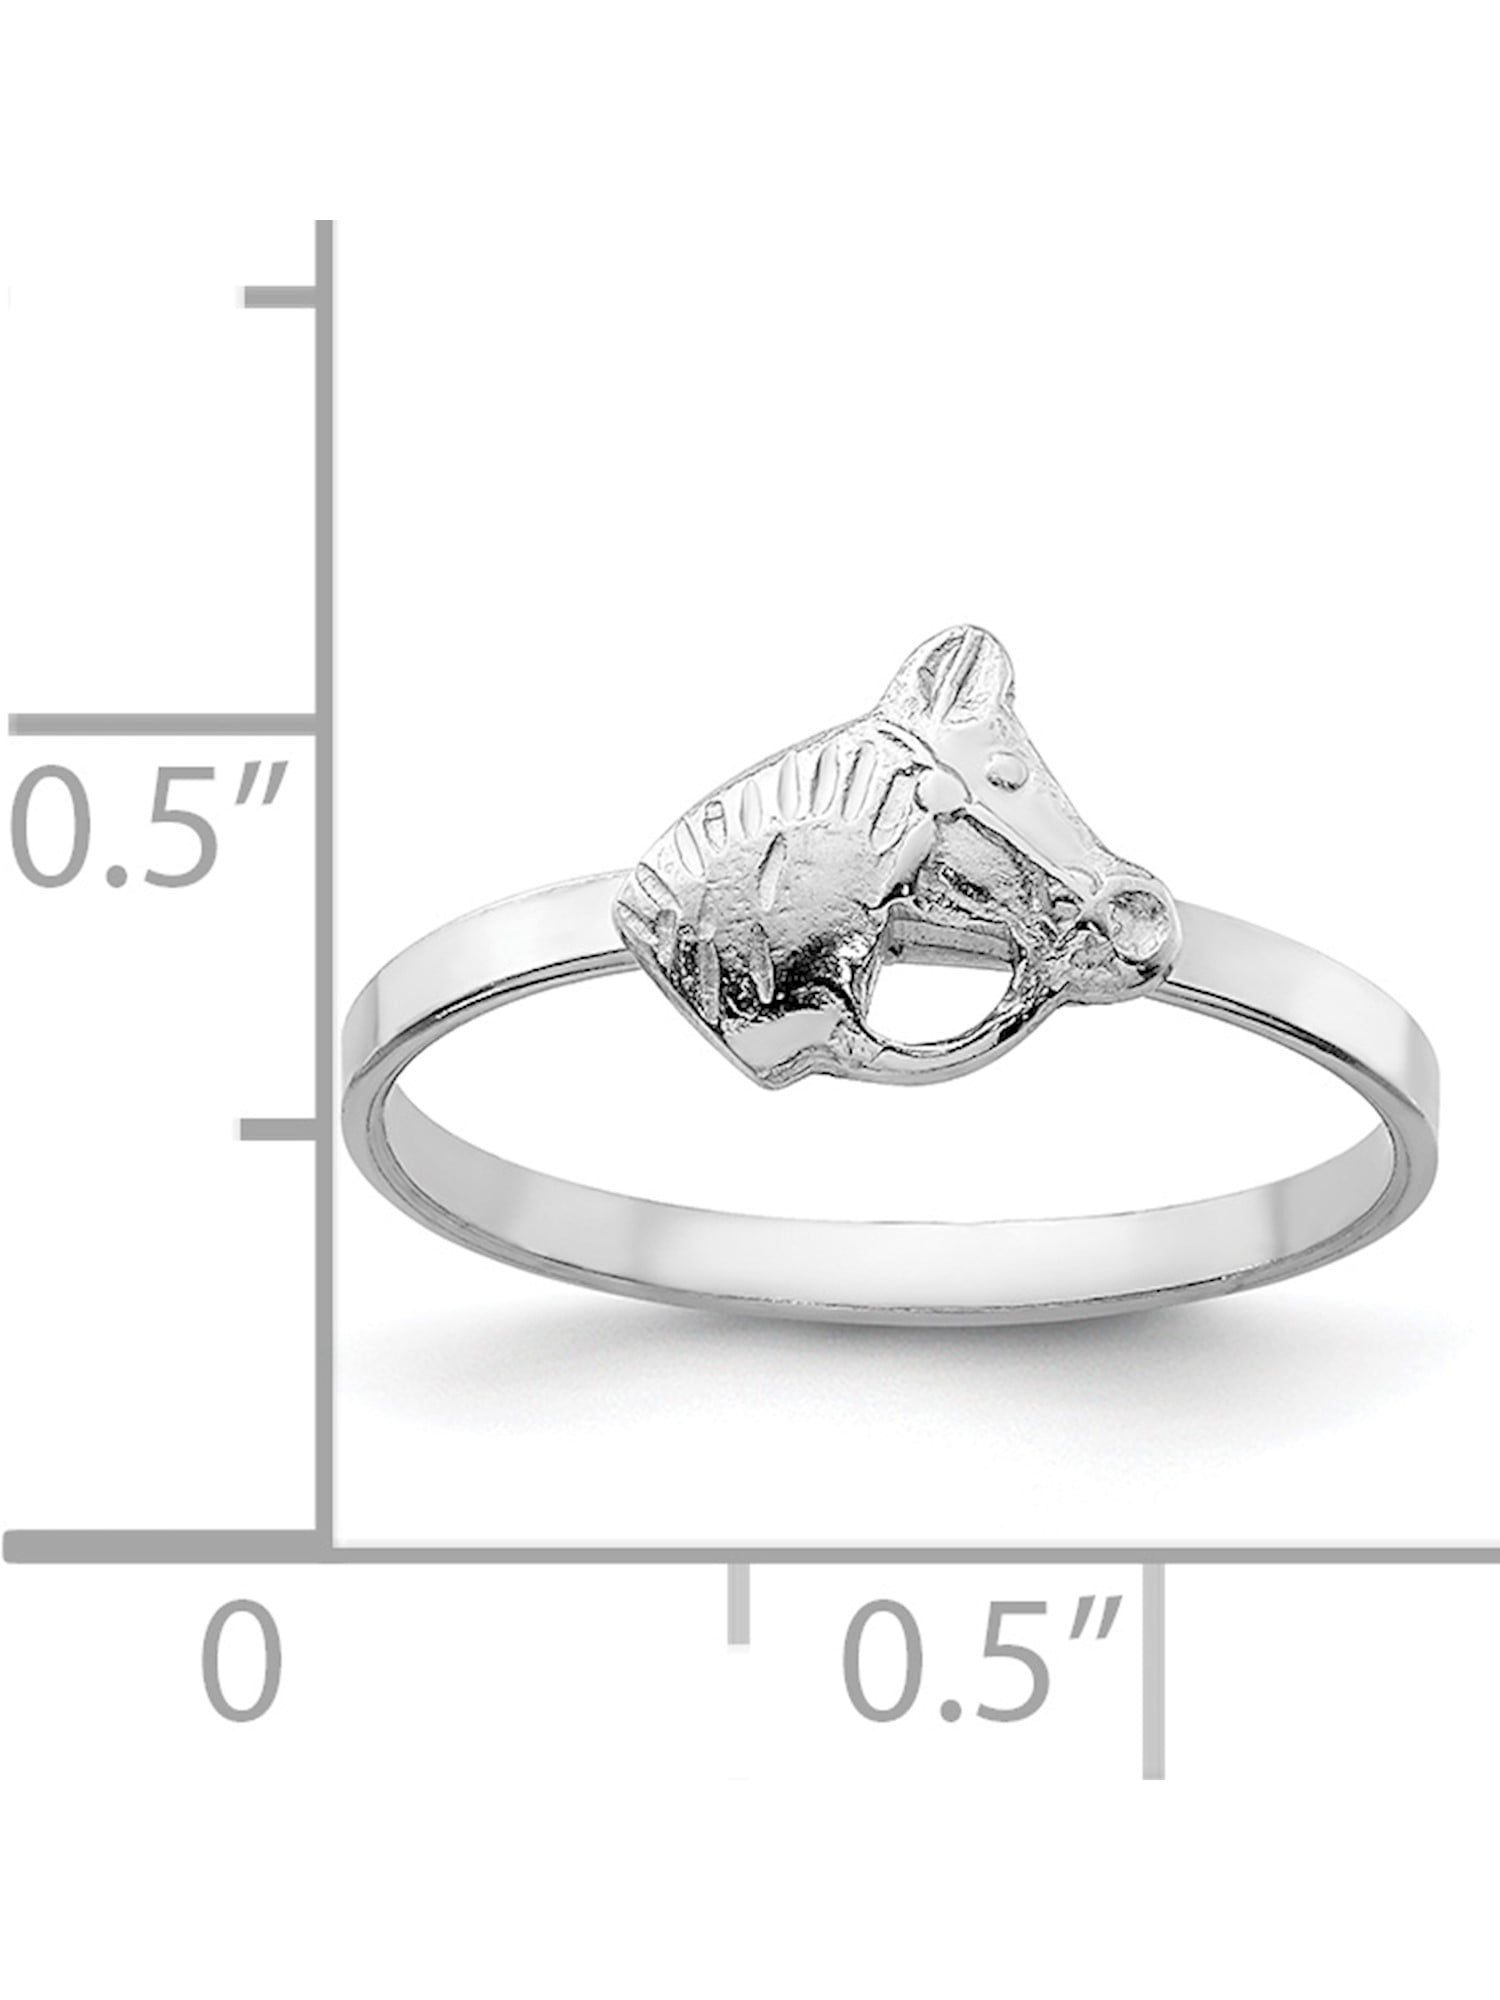 925 Sterling Silver Rhodium Plated Child's Polished Horse Textured Ring Size 4 